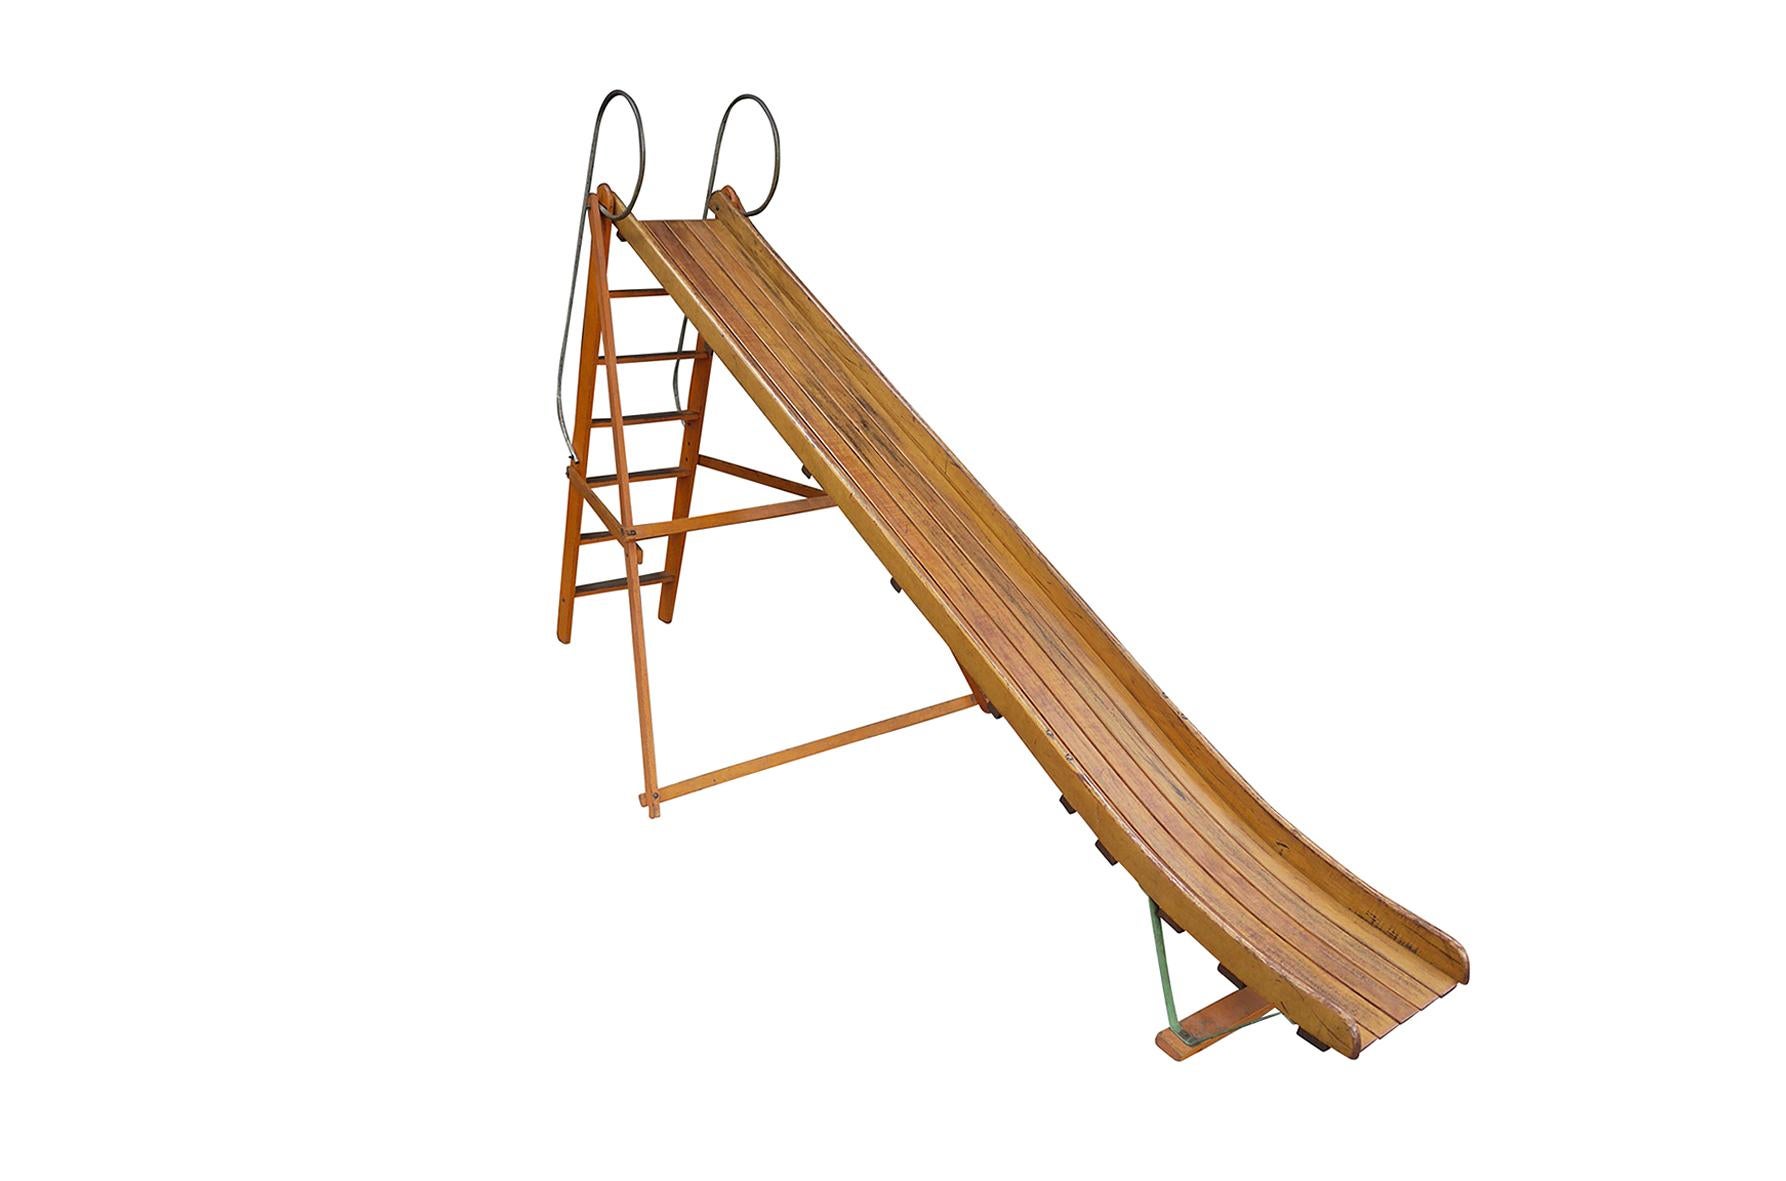 Vintage bent wood playground slide. Original finishes with even age appropriate patina. Was installed at one property since new. Can be used indoors or out.
____

We're offering our customers free domestic shipping on all items during the current